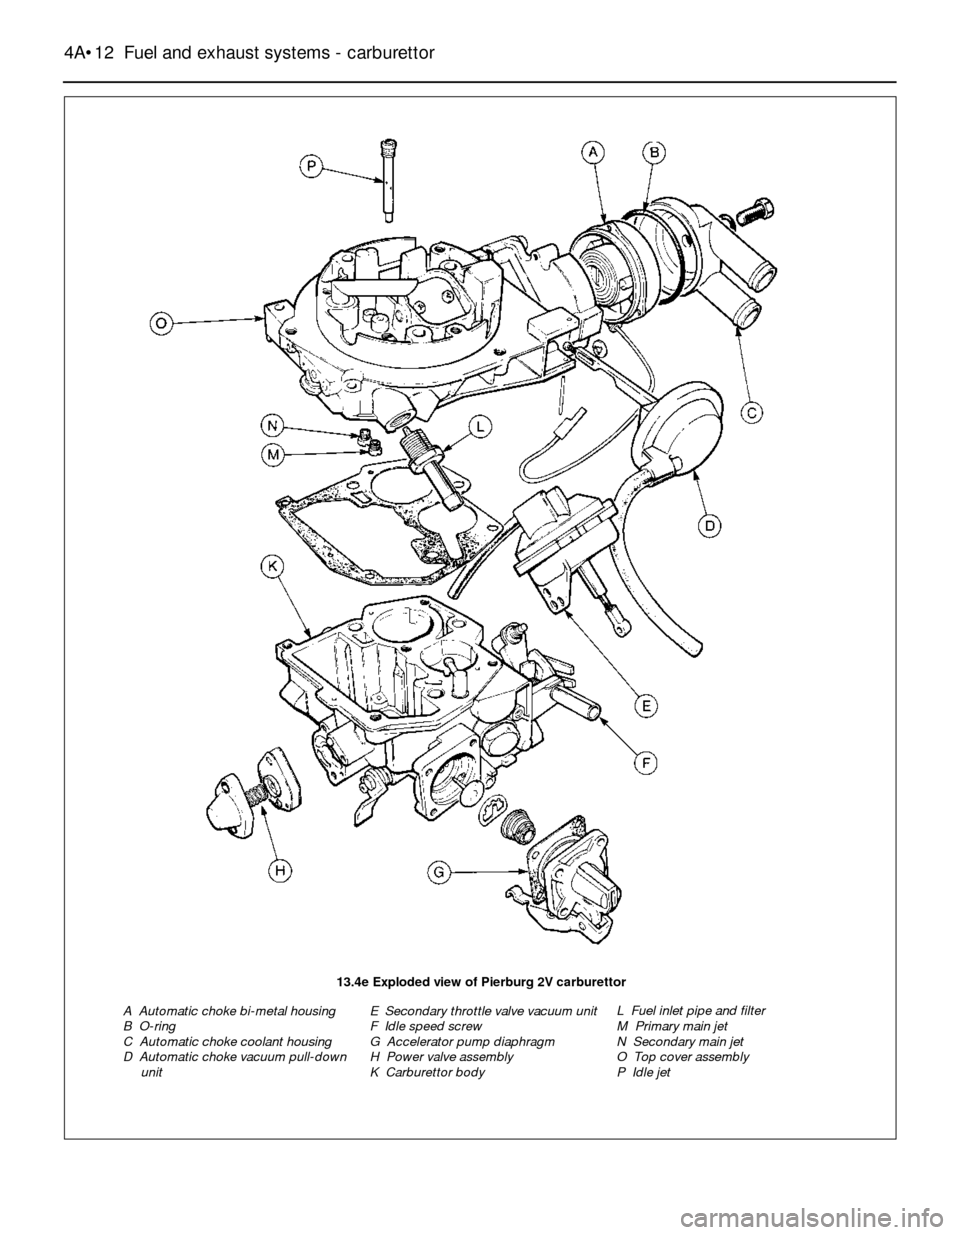 FORD SIERRA 1993 2.G Fuel And Exhaust Systems Carburettor User Guide 4A•12Fuel and exhaust systems - carburettor
13.4e Exploded view of Pierburg 2V carburettor
A  Automatic choke bi-metal housing
B  O-ring
C  Automatic choke coolant housing
D  Automatic choke vacuum 